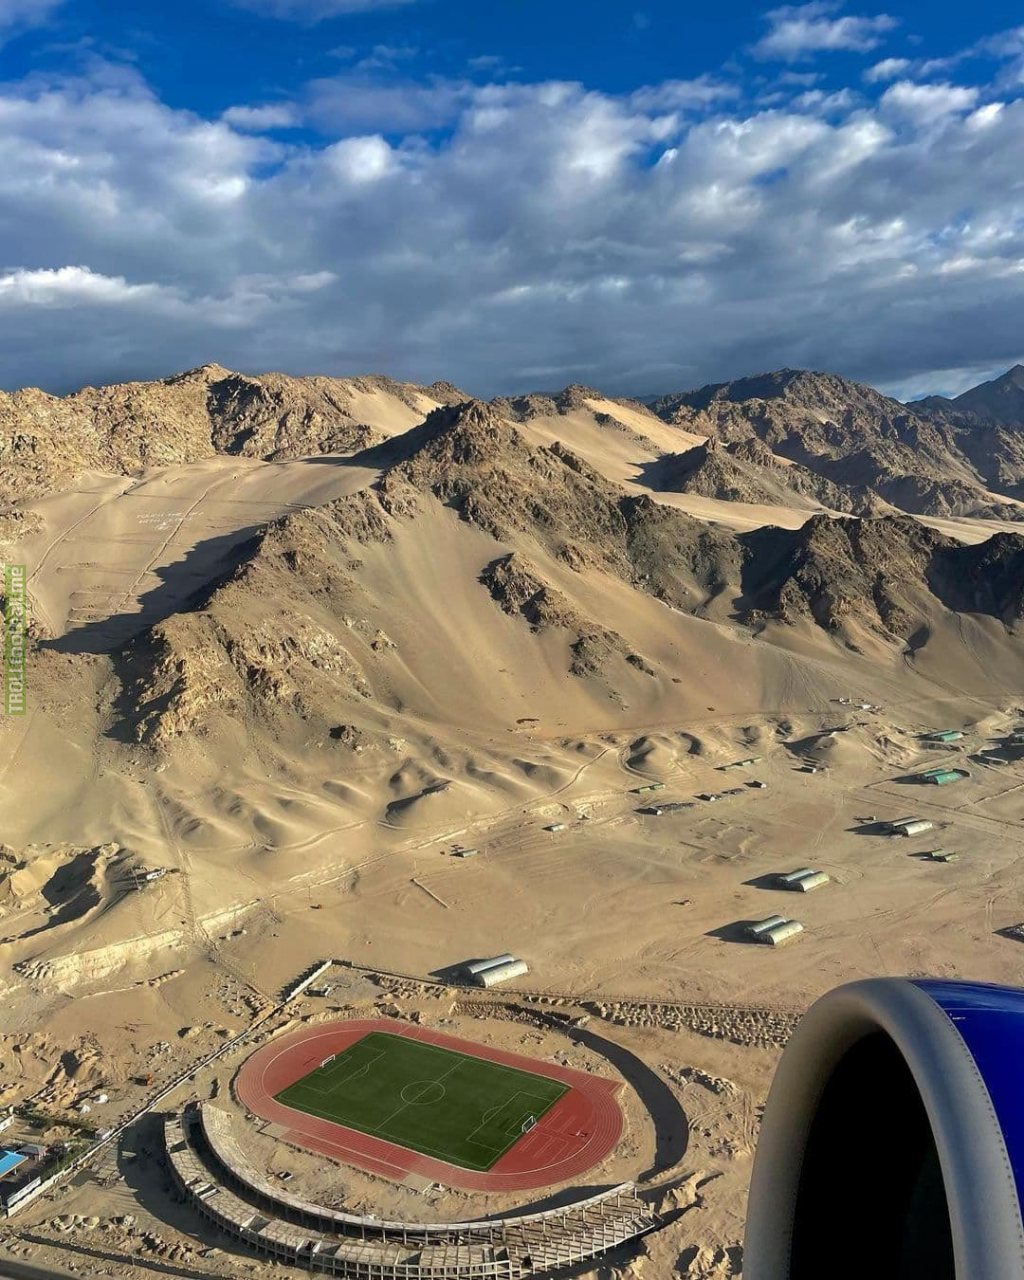 Open Stadium at Spituk,Leh at approx. 11,000 feet - Funded as part of Khelo India Sports Infrastructure